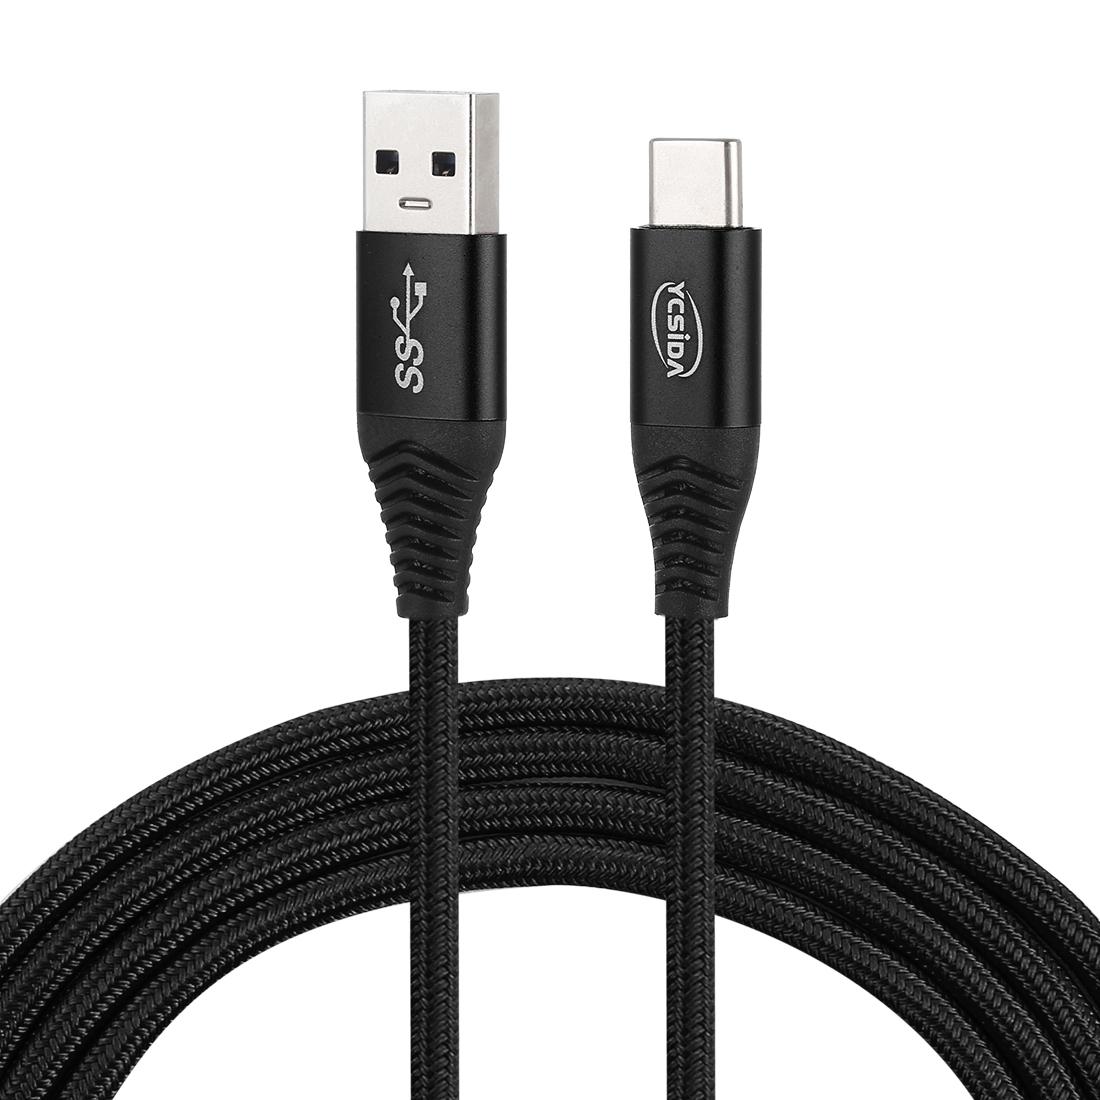 

12m Nylon Braided Cord USB to Type-C Data Sync Charge Cable with 110 Copper Wires Support Fast Charging For Galaxy Huawei Xiaomi LG HTC and